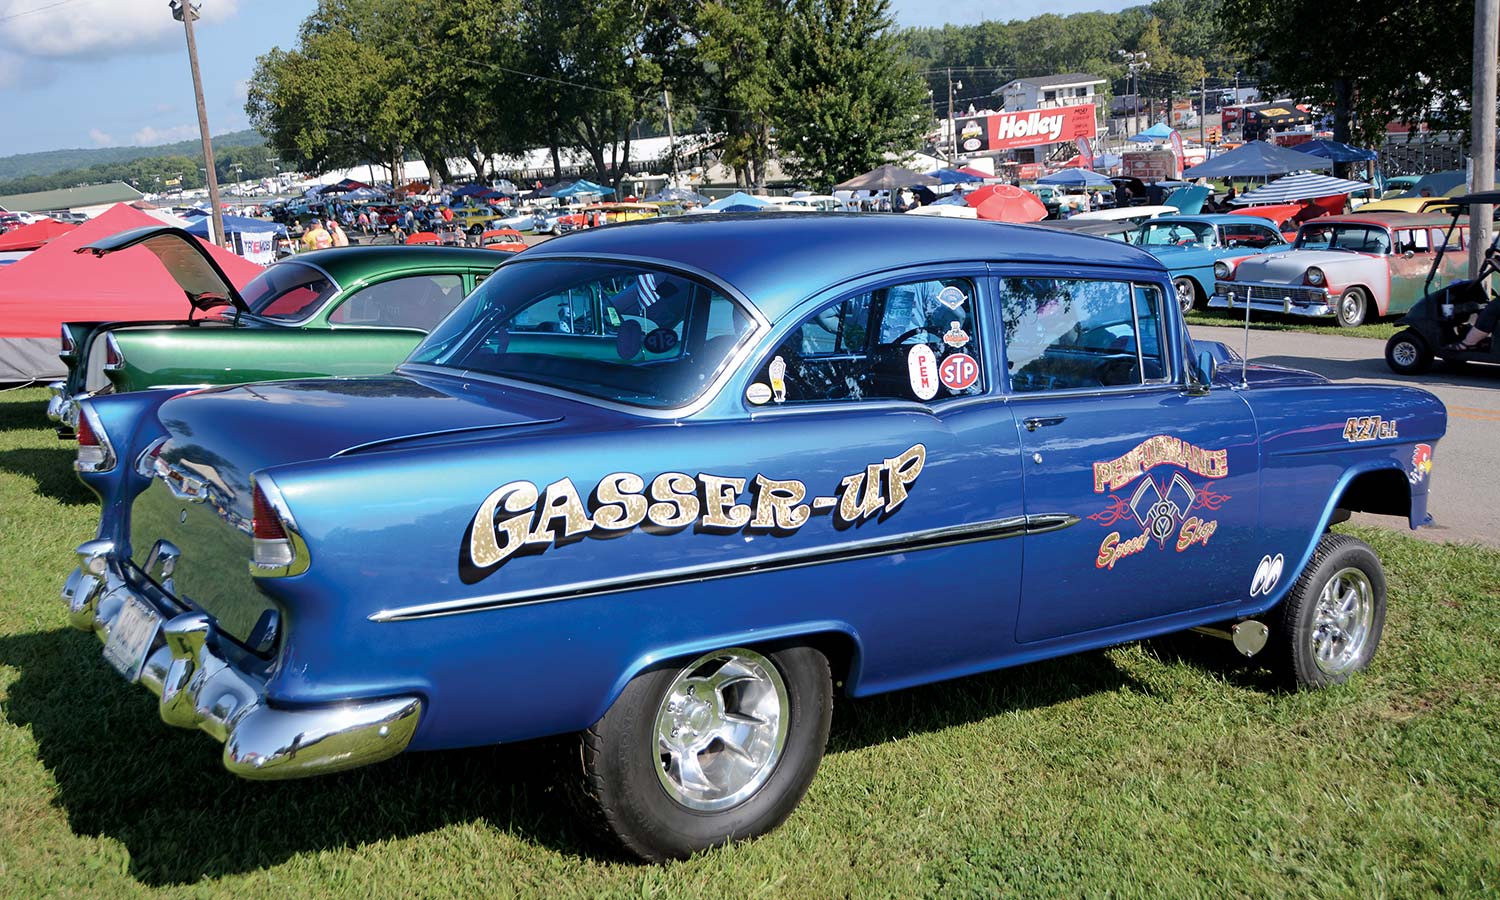 Blue gasser with the words gasser-up painted on the side